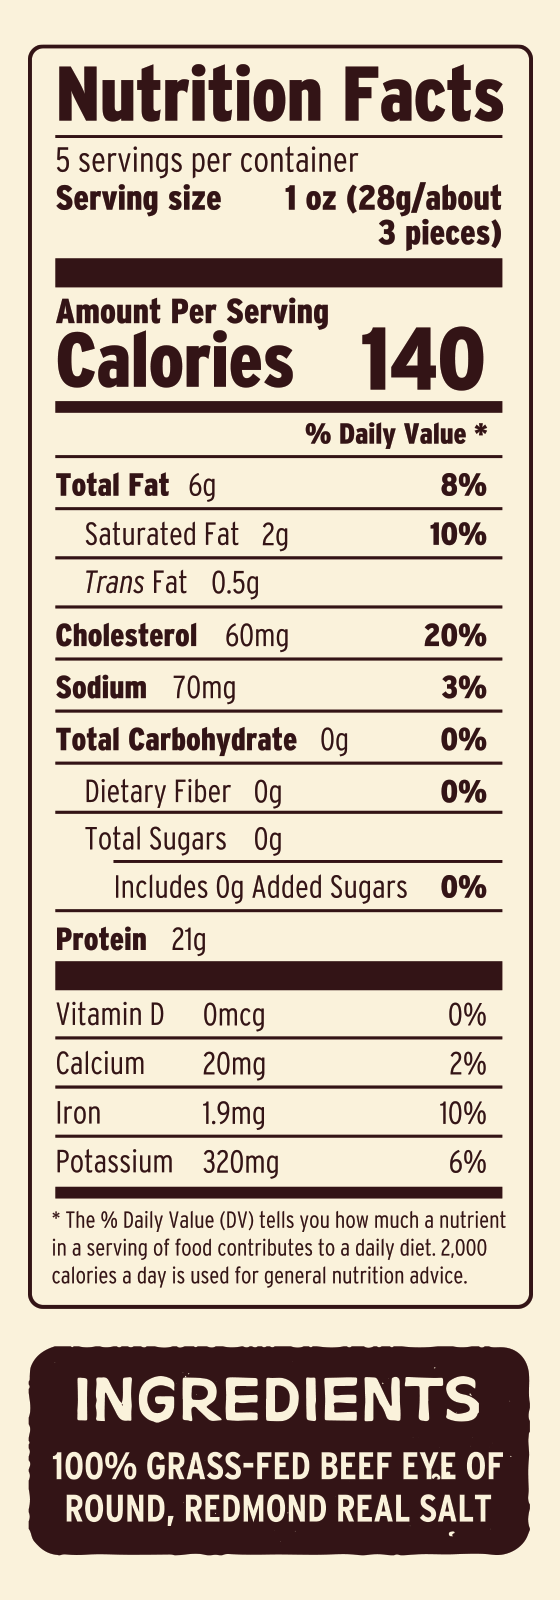 EYE OF ROUND Nutritional Facts